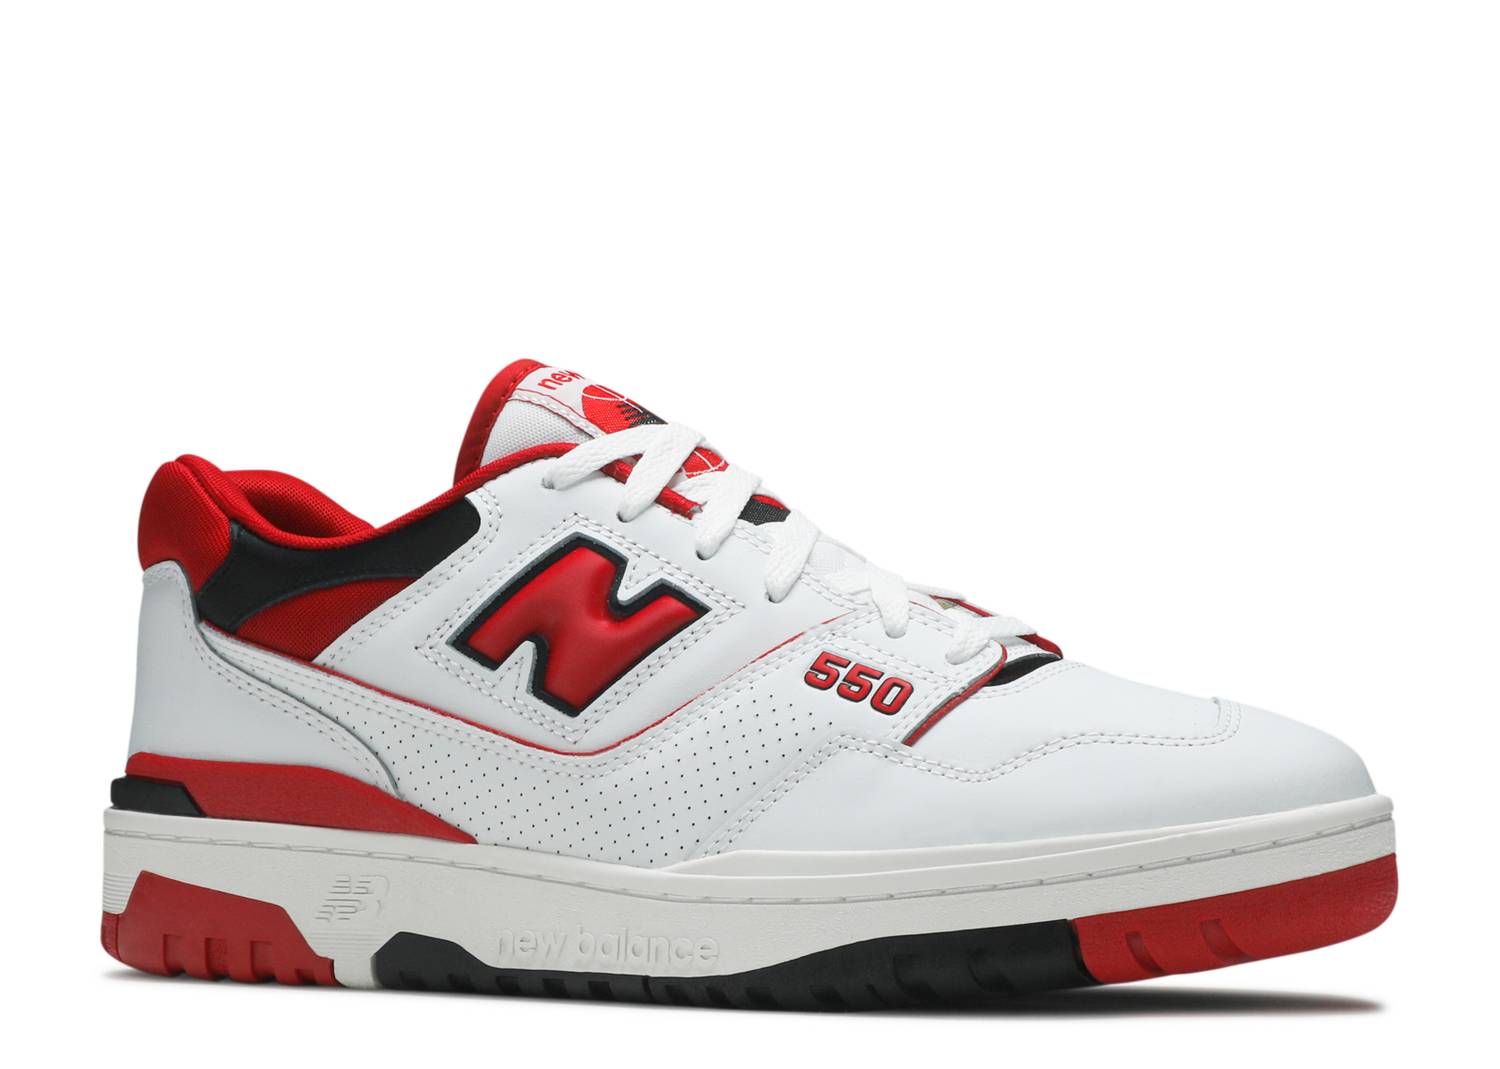 Foot Locker on X: What color are you going for? #Newbalance 550